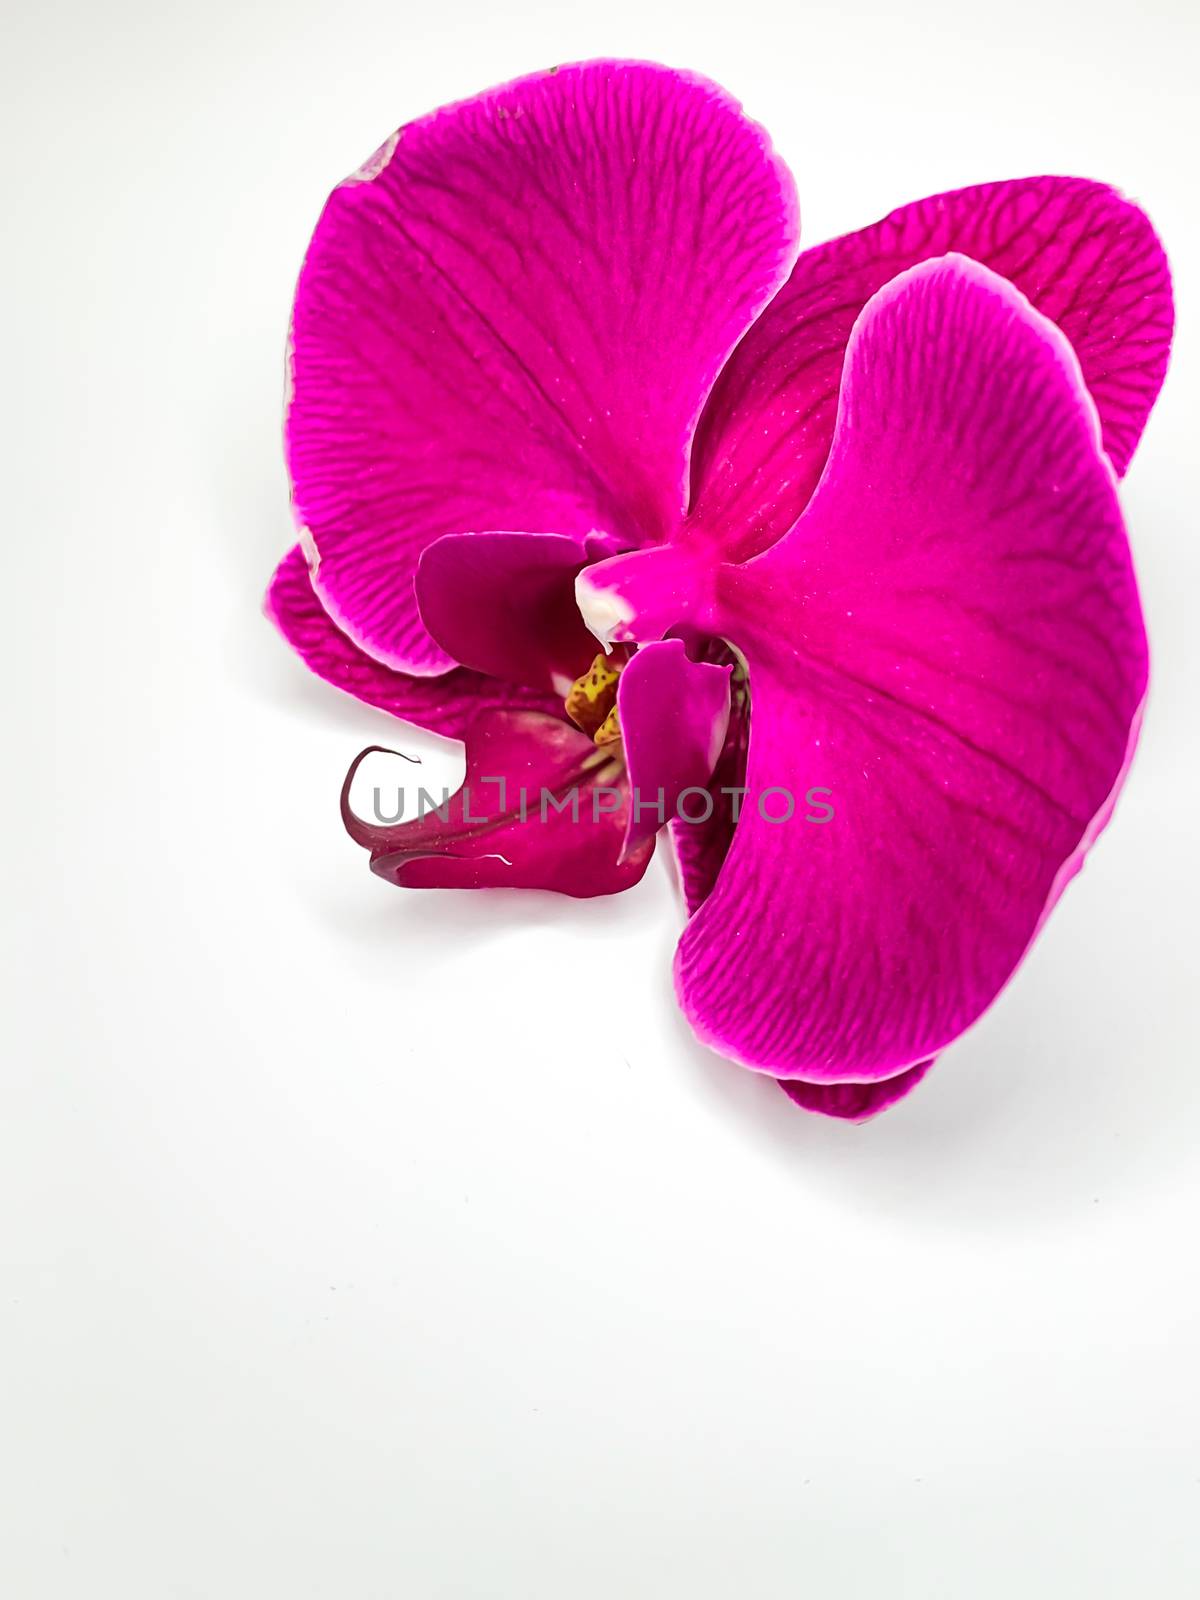 close up purple single Phalaenopsis orchid flower postcard on a white background. Vertical image